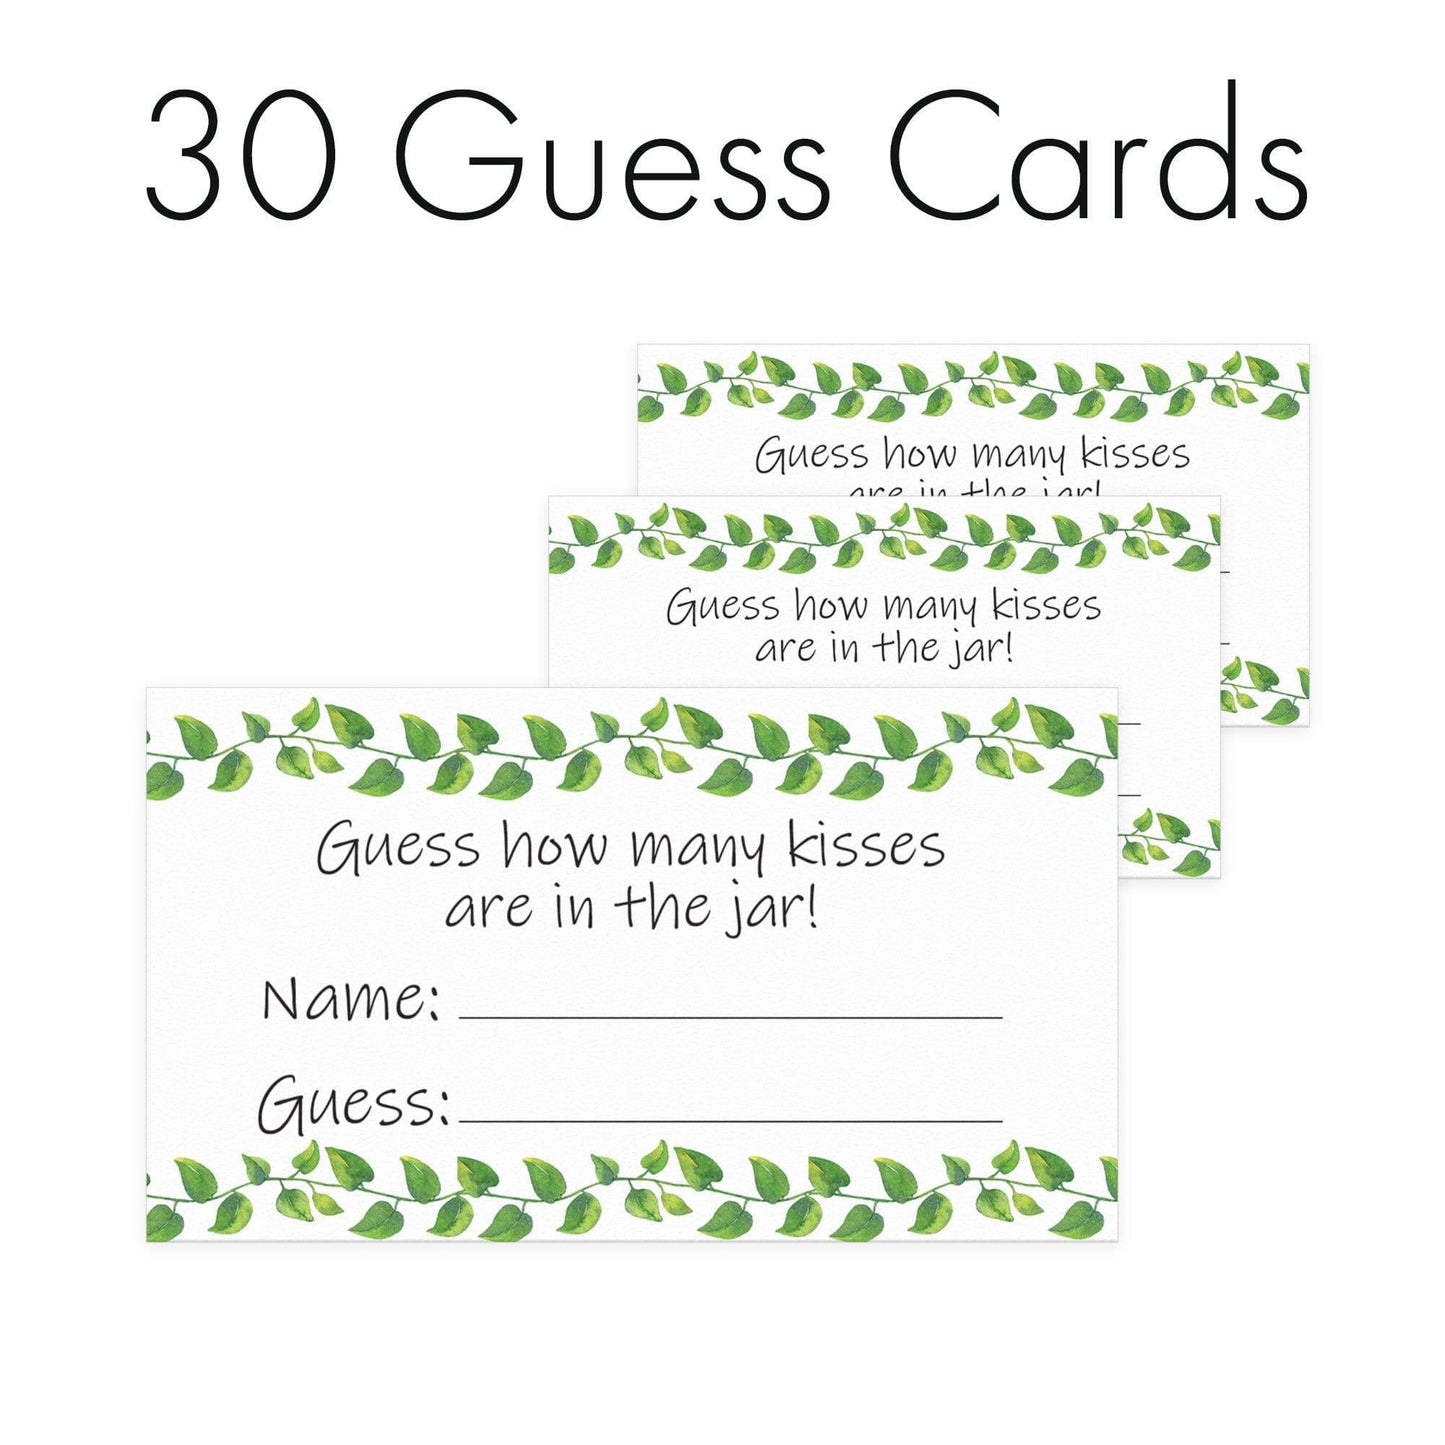 Extra Guess Cards ONLY (No Sign) Greenery How Many Kisses Game